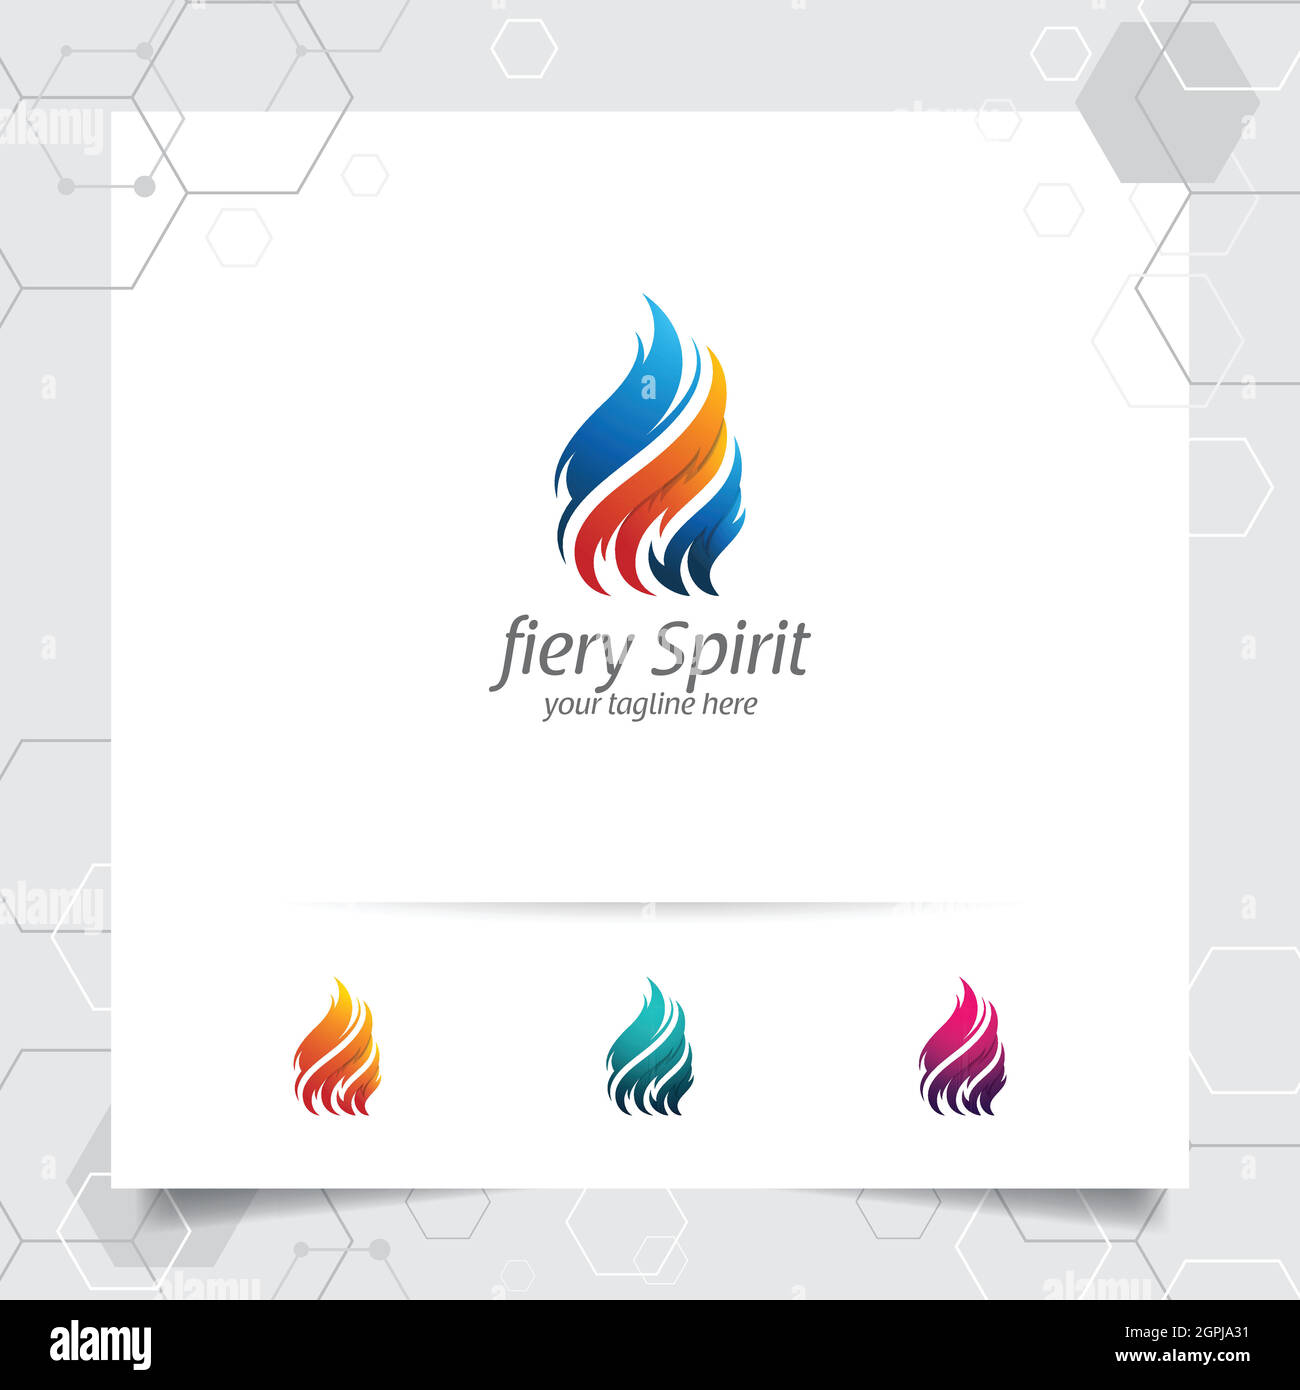 Fire logo design vector with concept of fire blazing . Oil gas logo for mining industry and fuel processing. Stock Vector